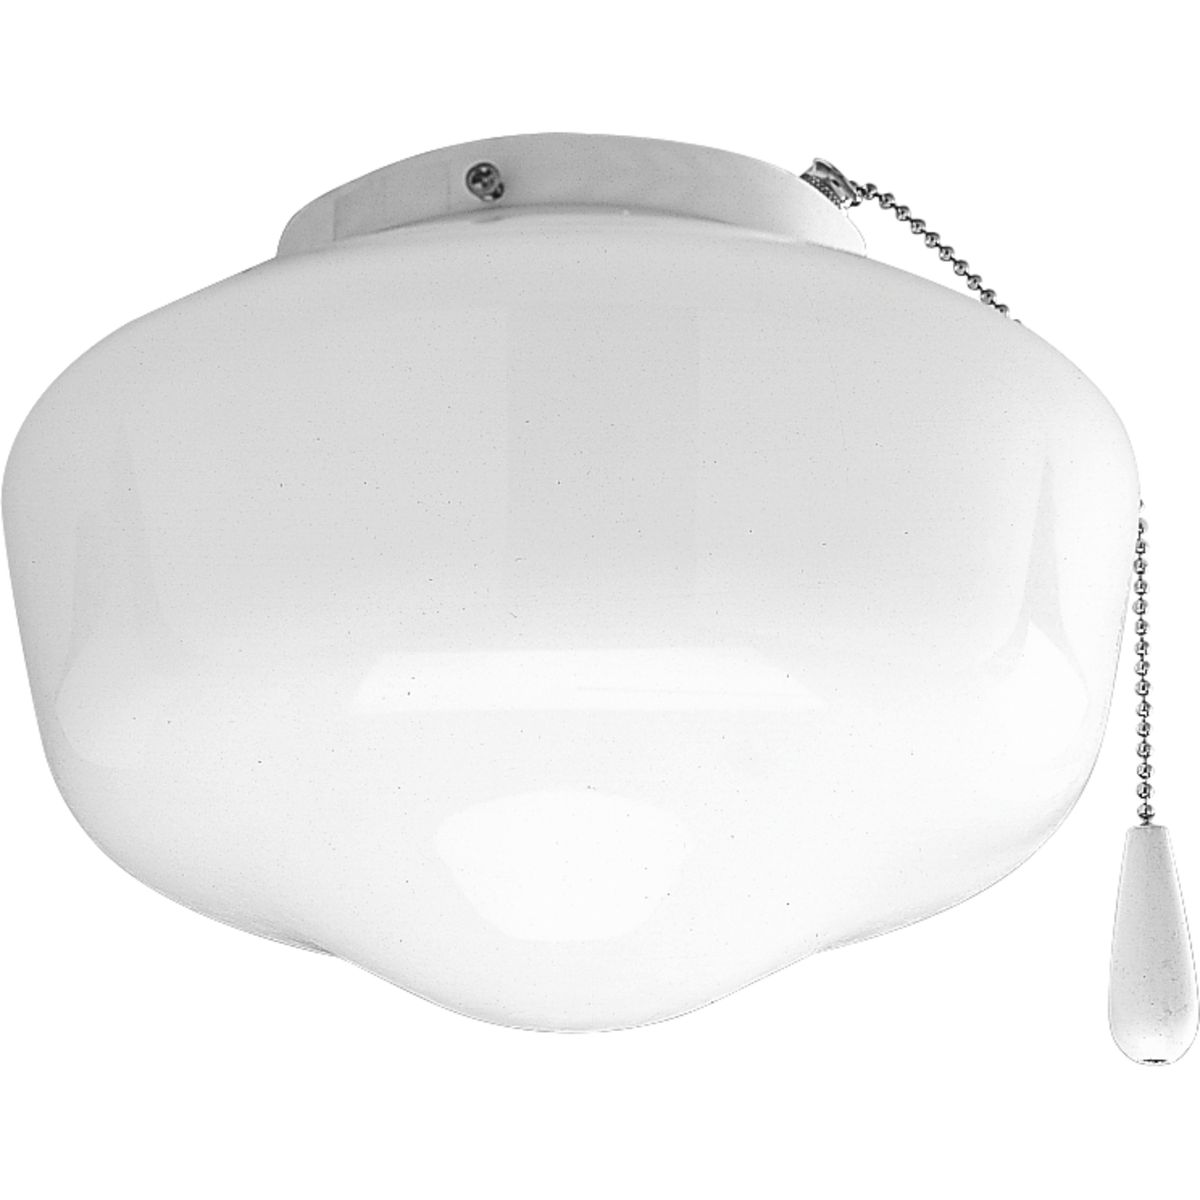 One-light Schoolhouse style ceiling fan light kit with white opal glass in a White finish. Listed for wet locations makes this ideal for any indoor/outdoor locations. Universal mount allows for installation with Progress and other fans (threaded adapter included). Quick connector for easy wiring is included. Includes one 3000K, 800 lumen each (source), Title 24 certified LED bulb.